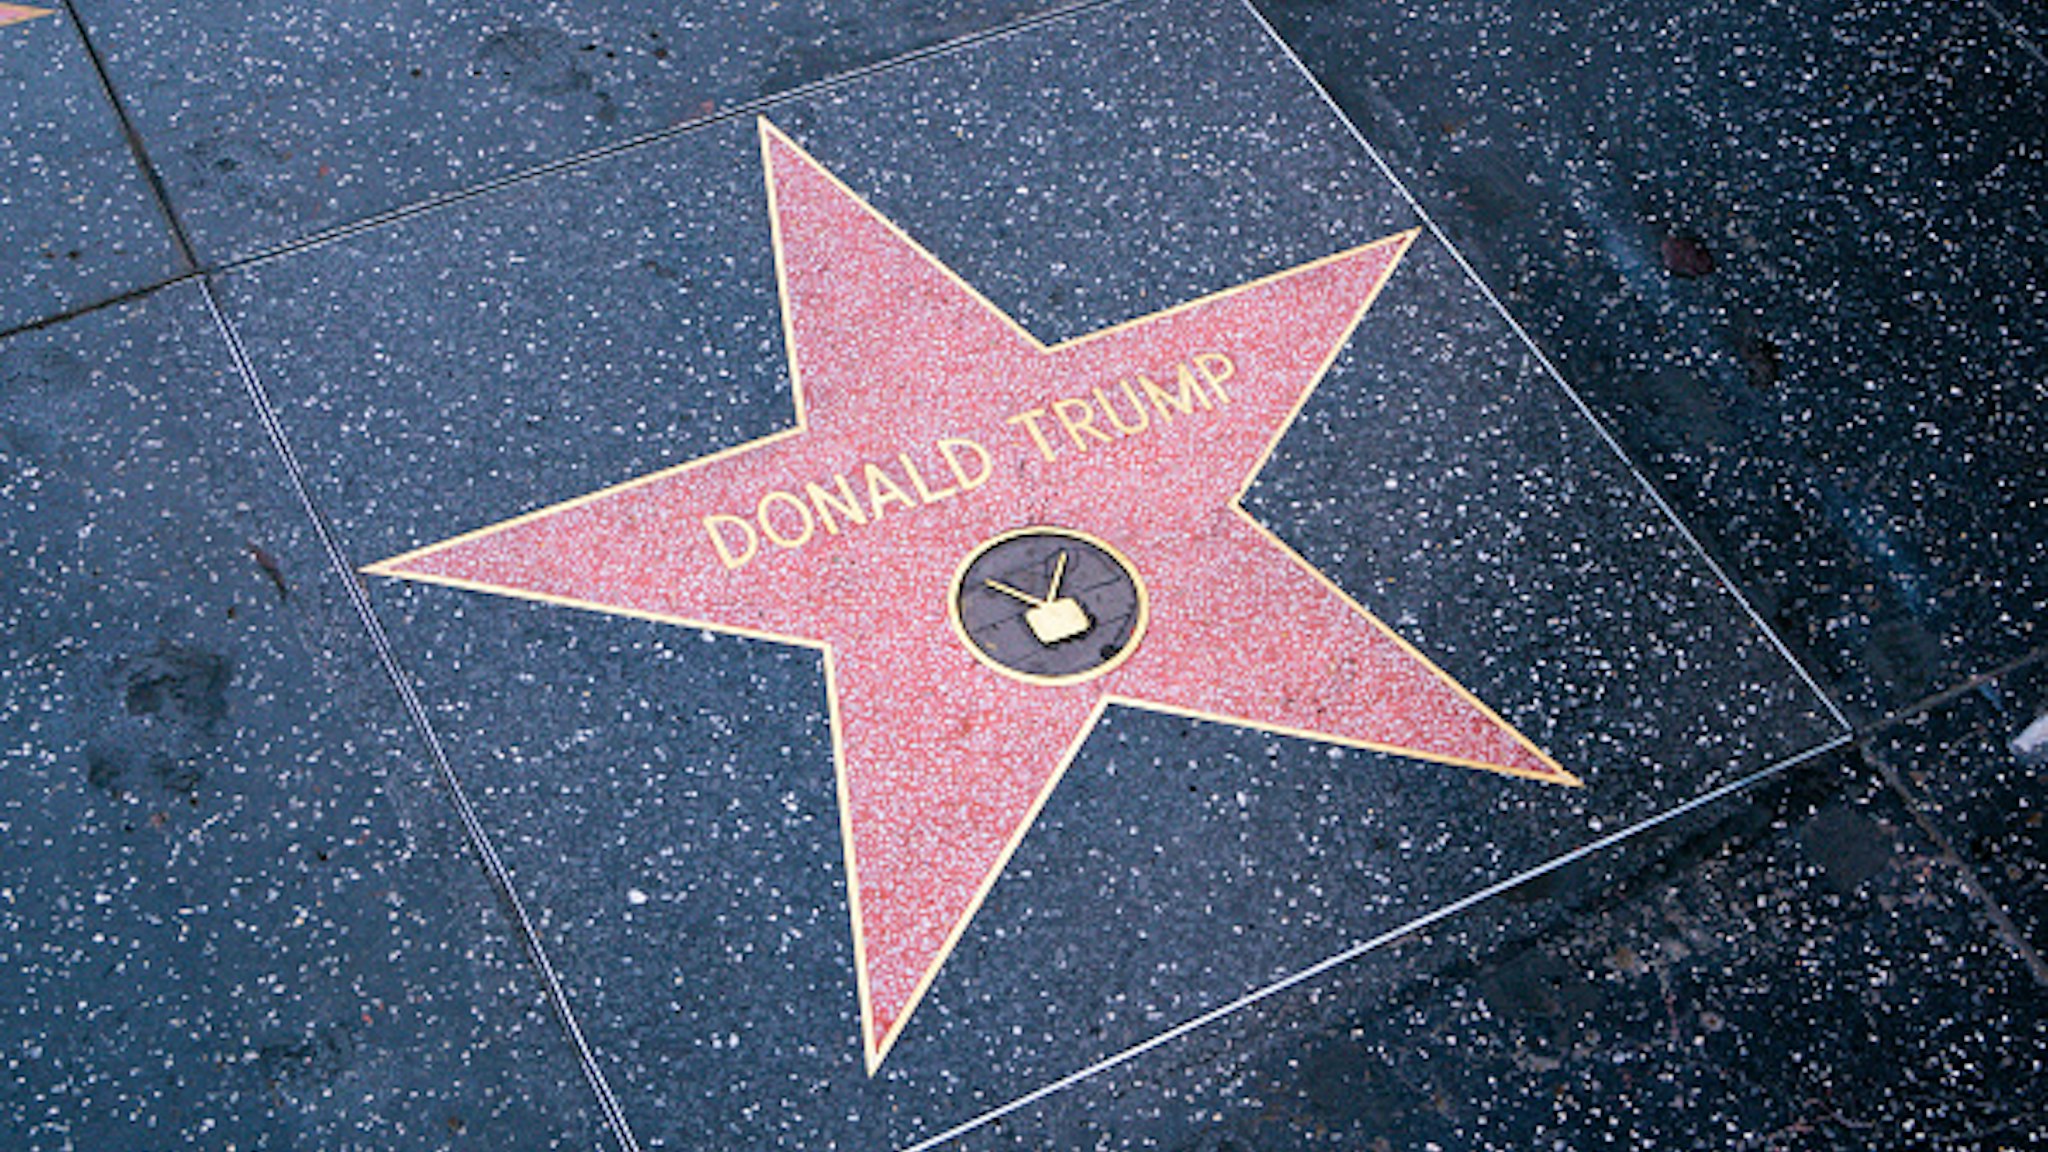 HOLLYWOOD, CA - APRIL 21: General view of Donald Trump's Star on the Walk of Fame, unveiled for the first time after being destroyed in early October 2020 and then covered with plywood for months, after being re-forged on April 21, 2021 in Hollywood, California.